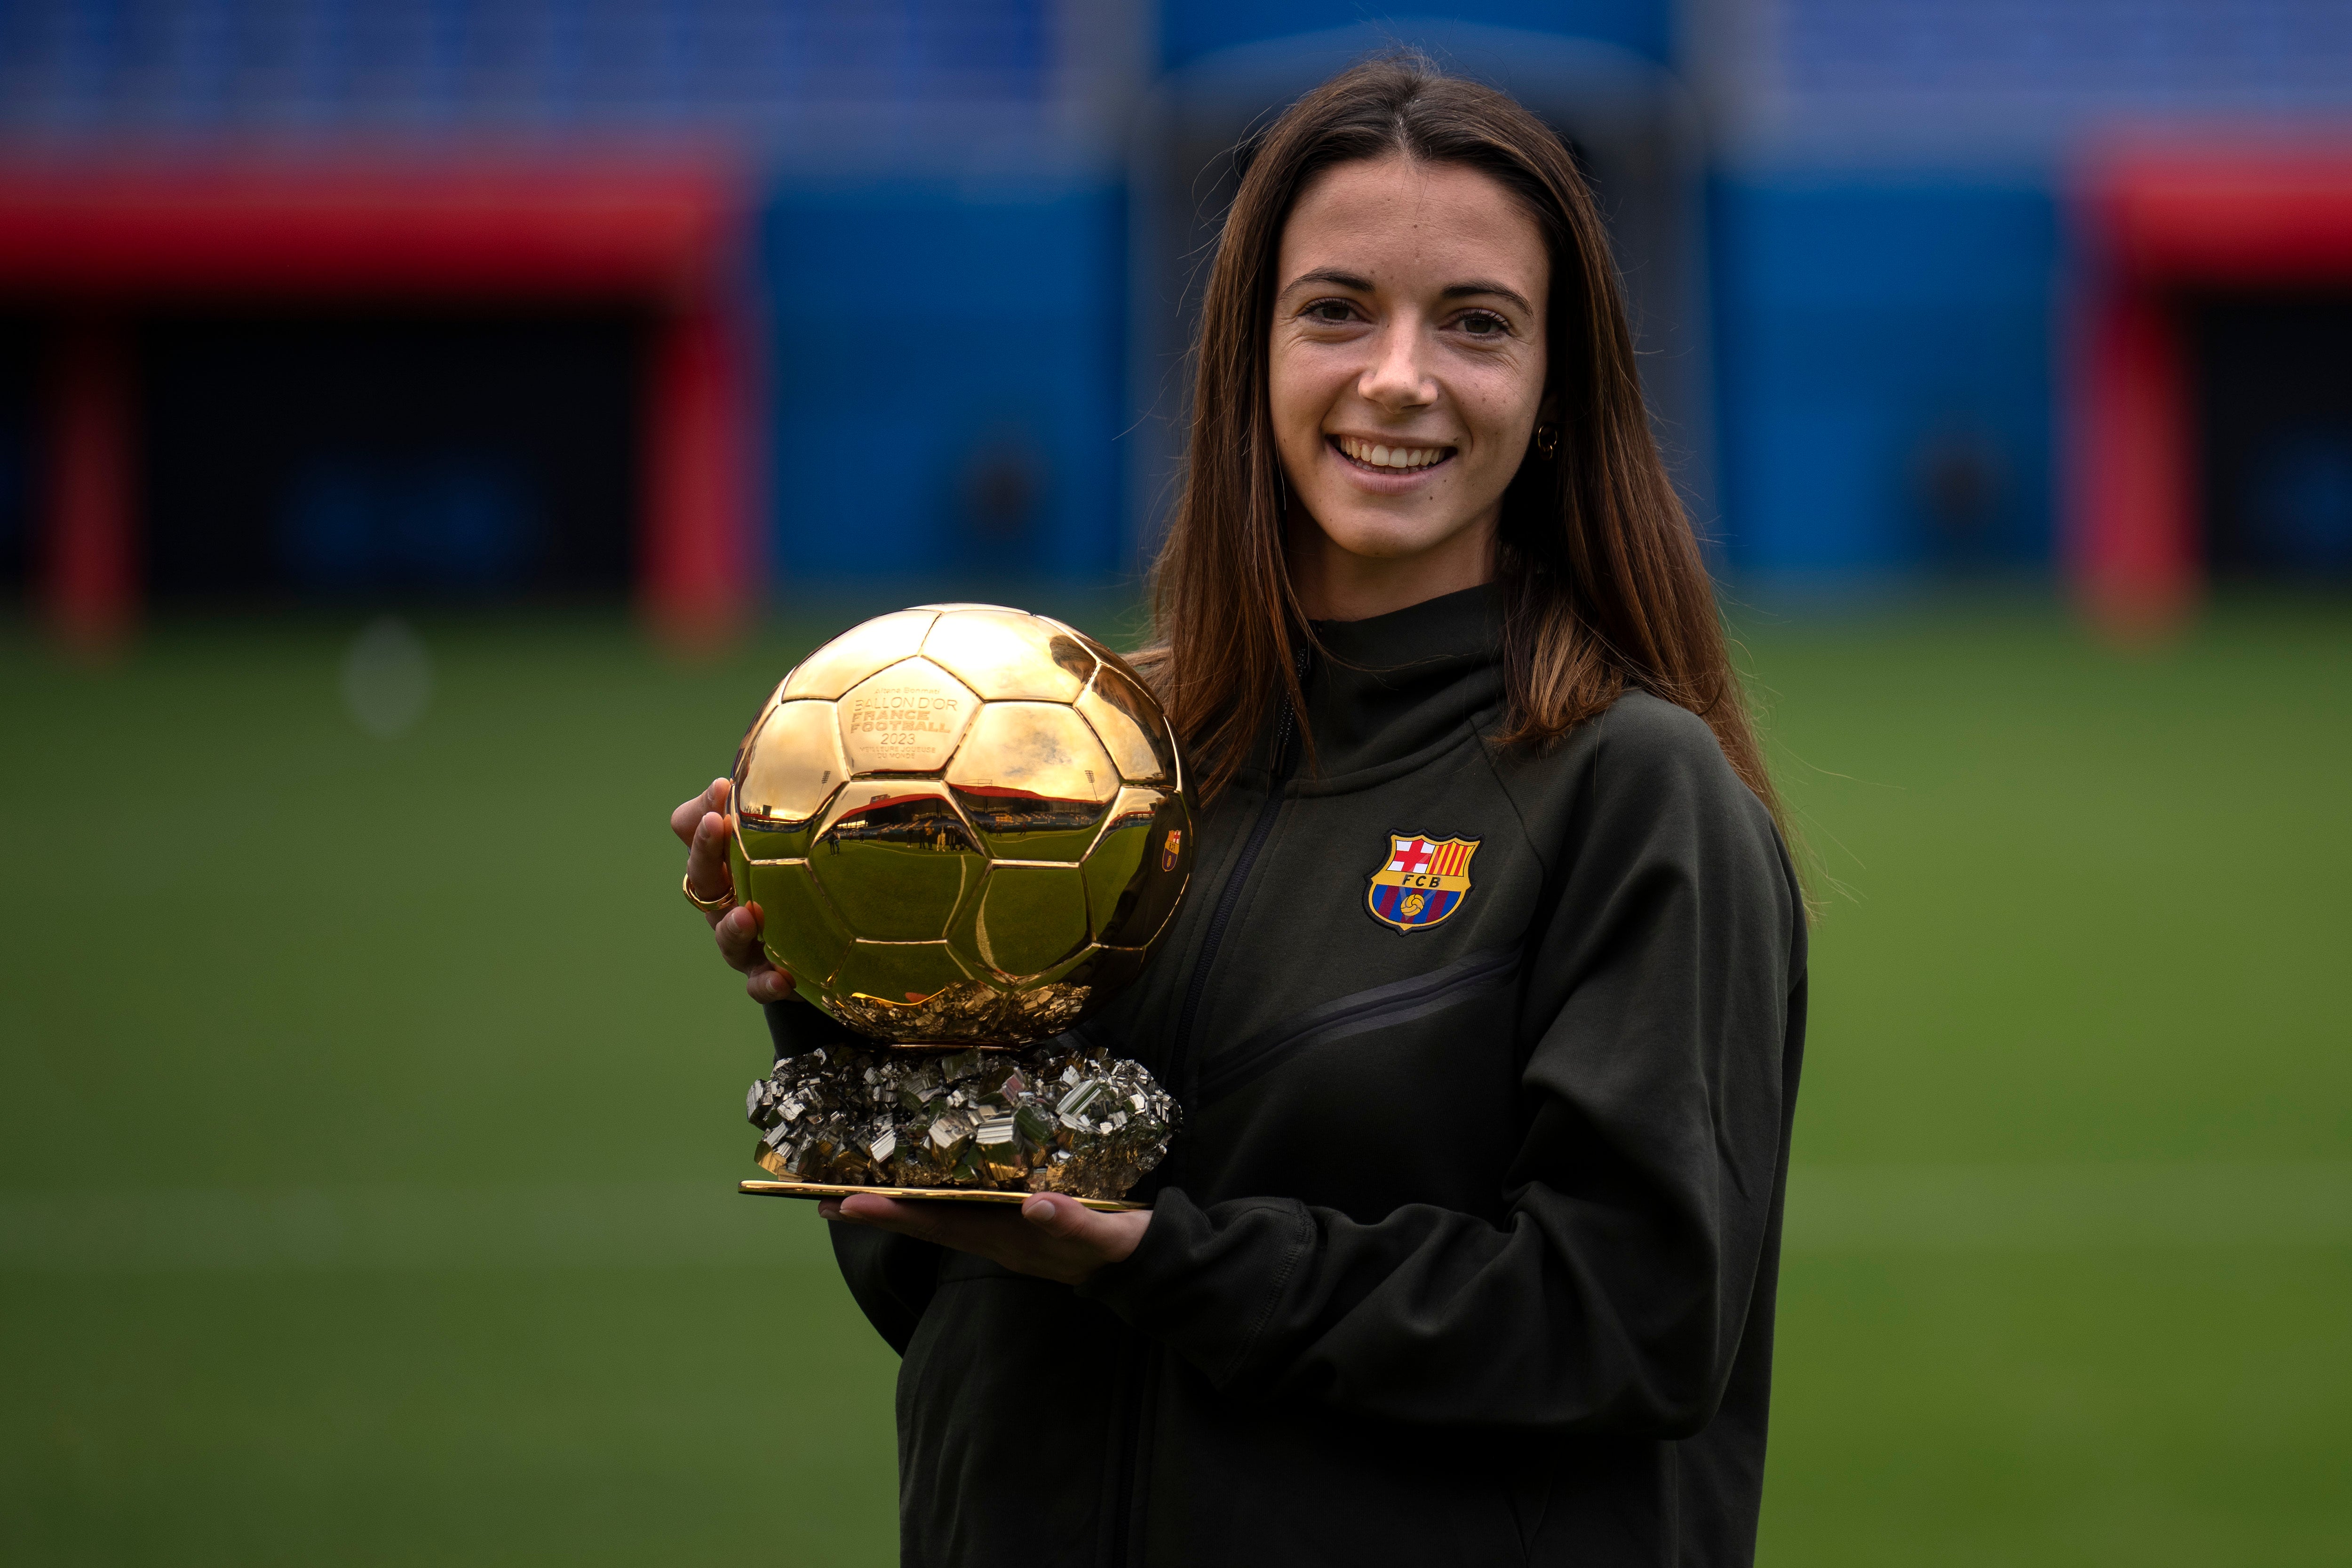 Aitani Bonmati says nothing has changed for women’s footballers in Spain